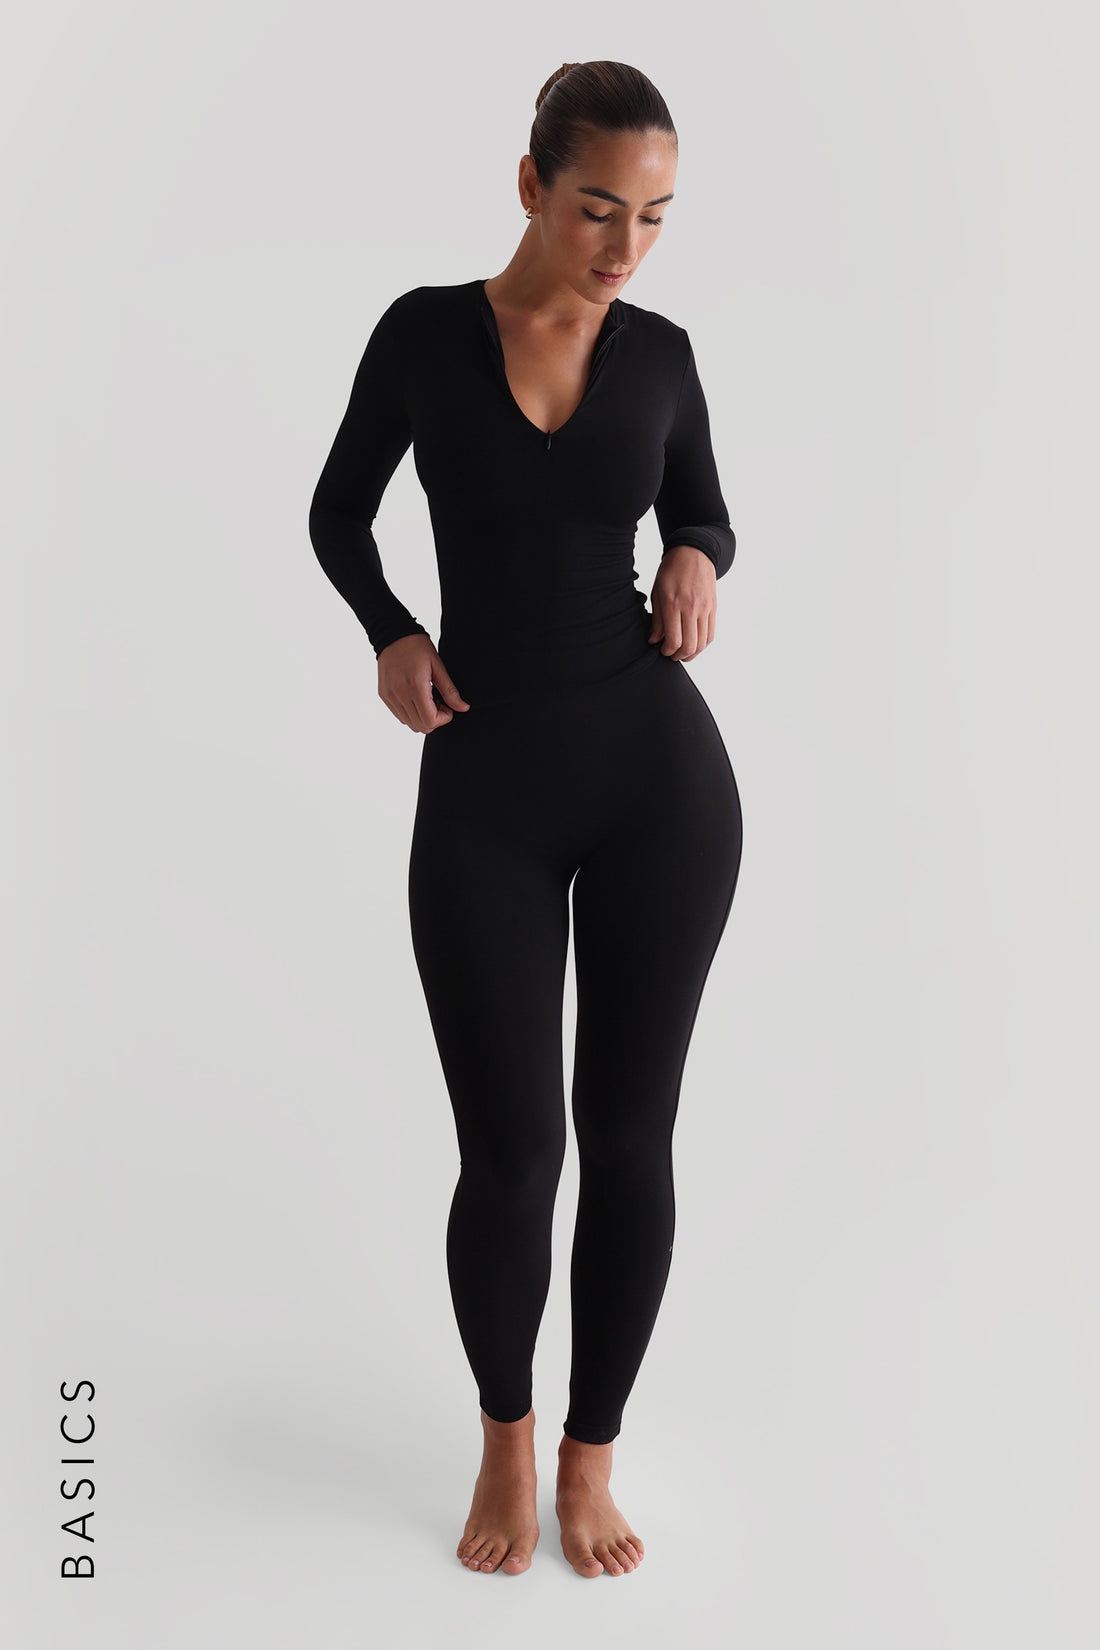 Pro-Technical Leggings - Black – My Outfit Online